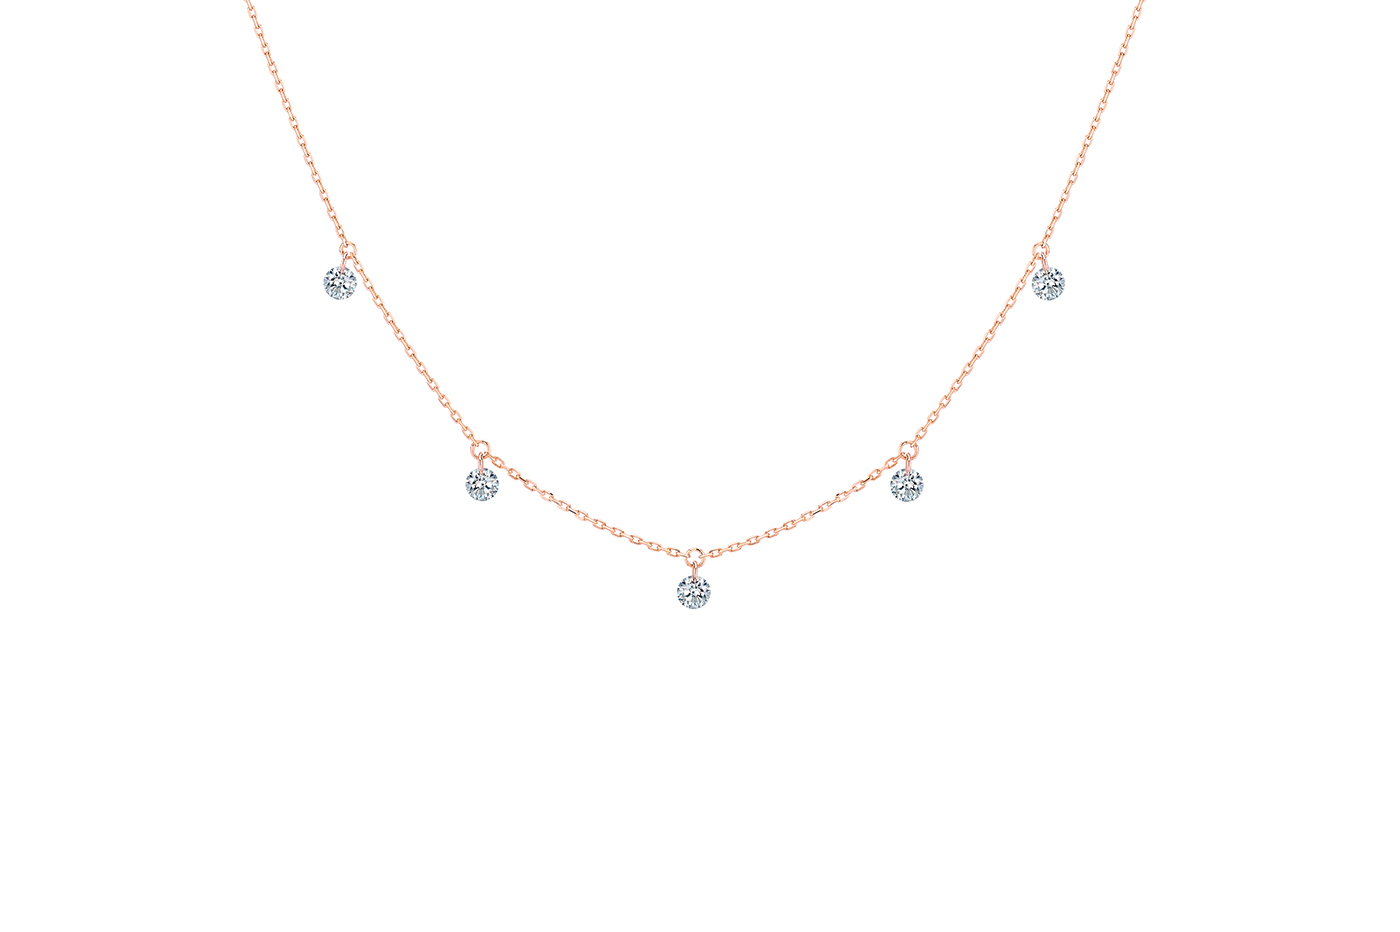 Collier 360° - 5 diamants, poids total 0,50 ct approx., or 18KT, 1gr. 